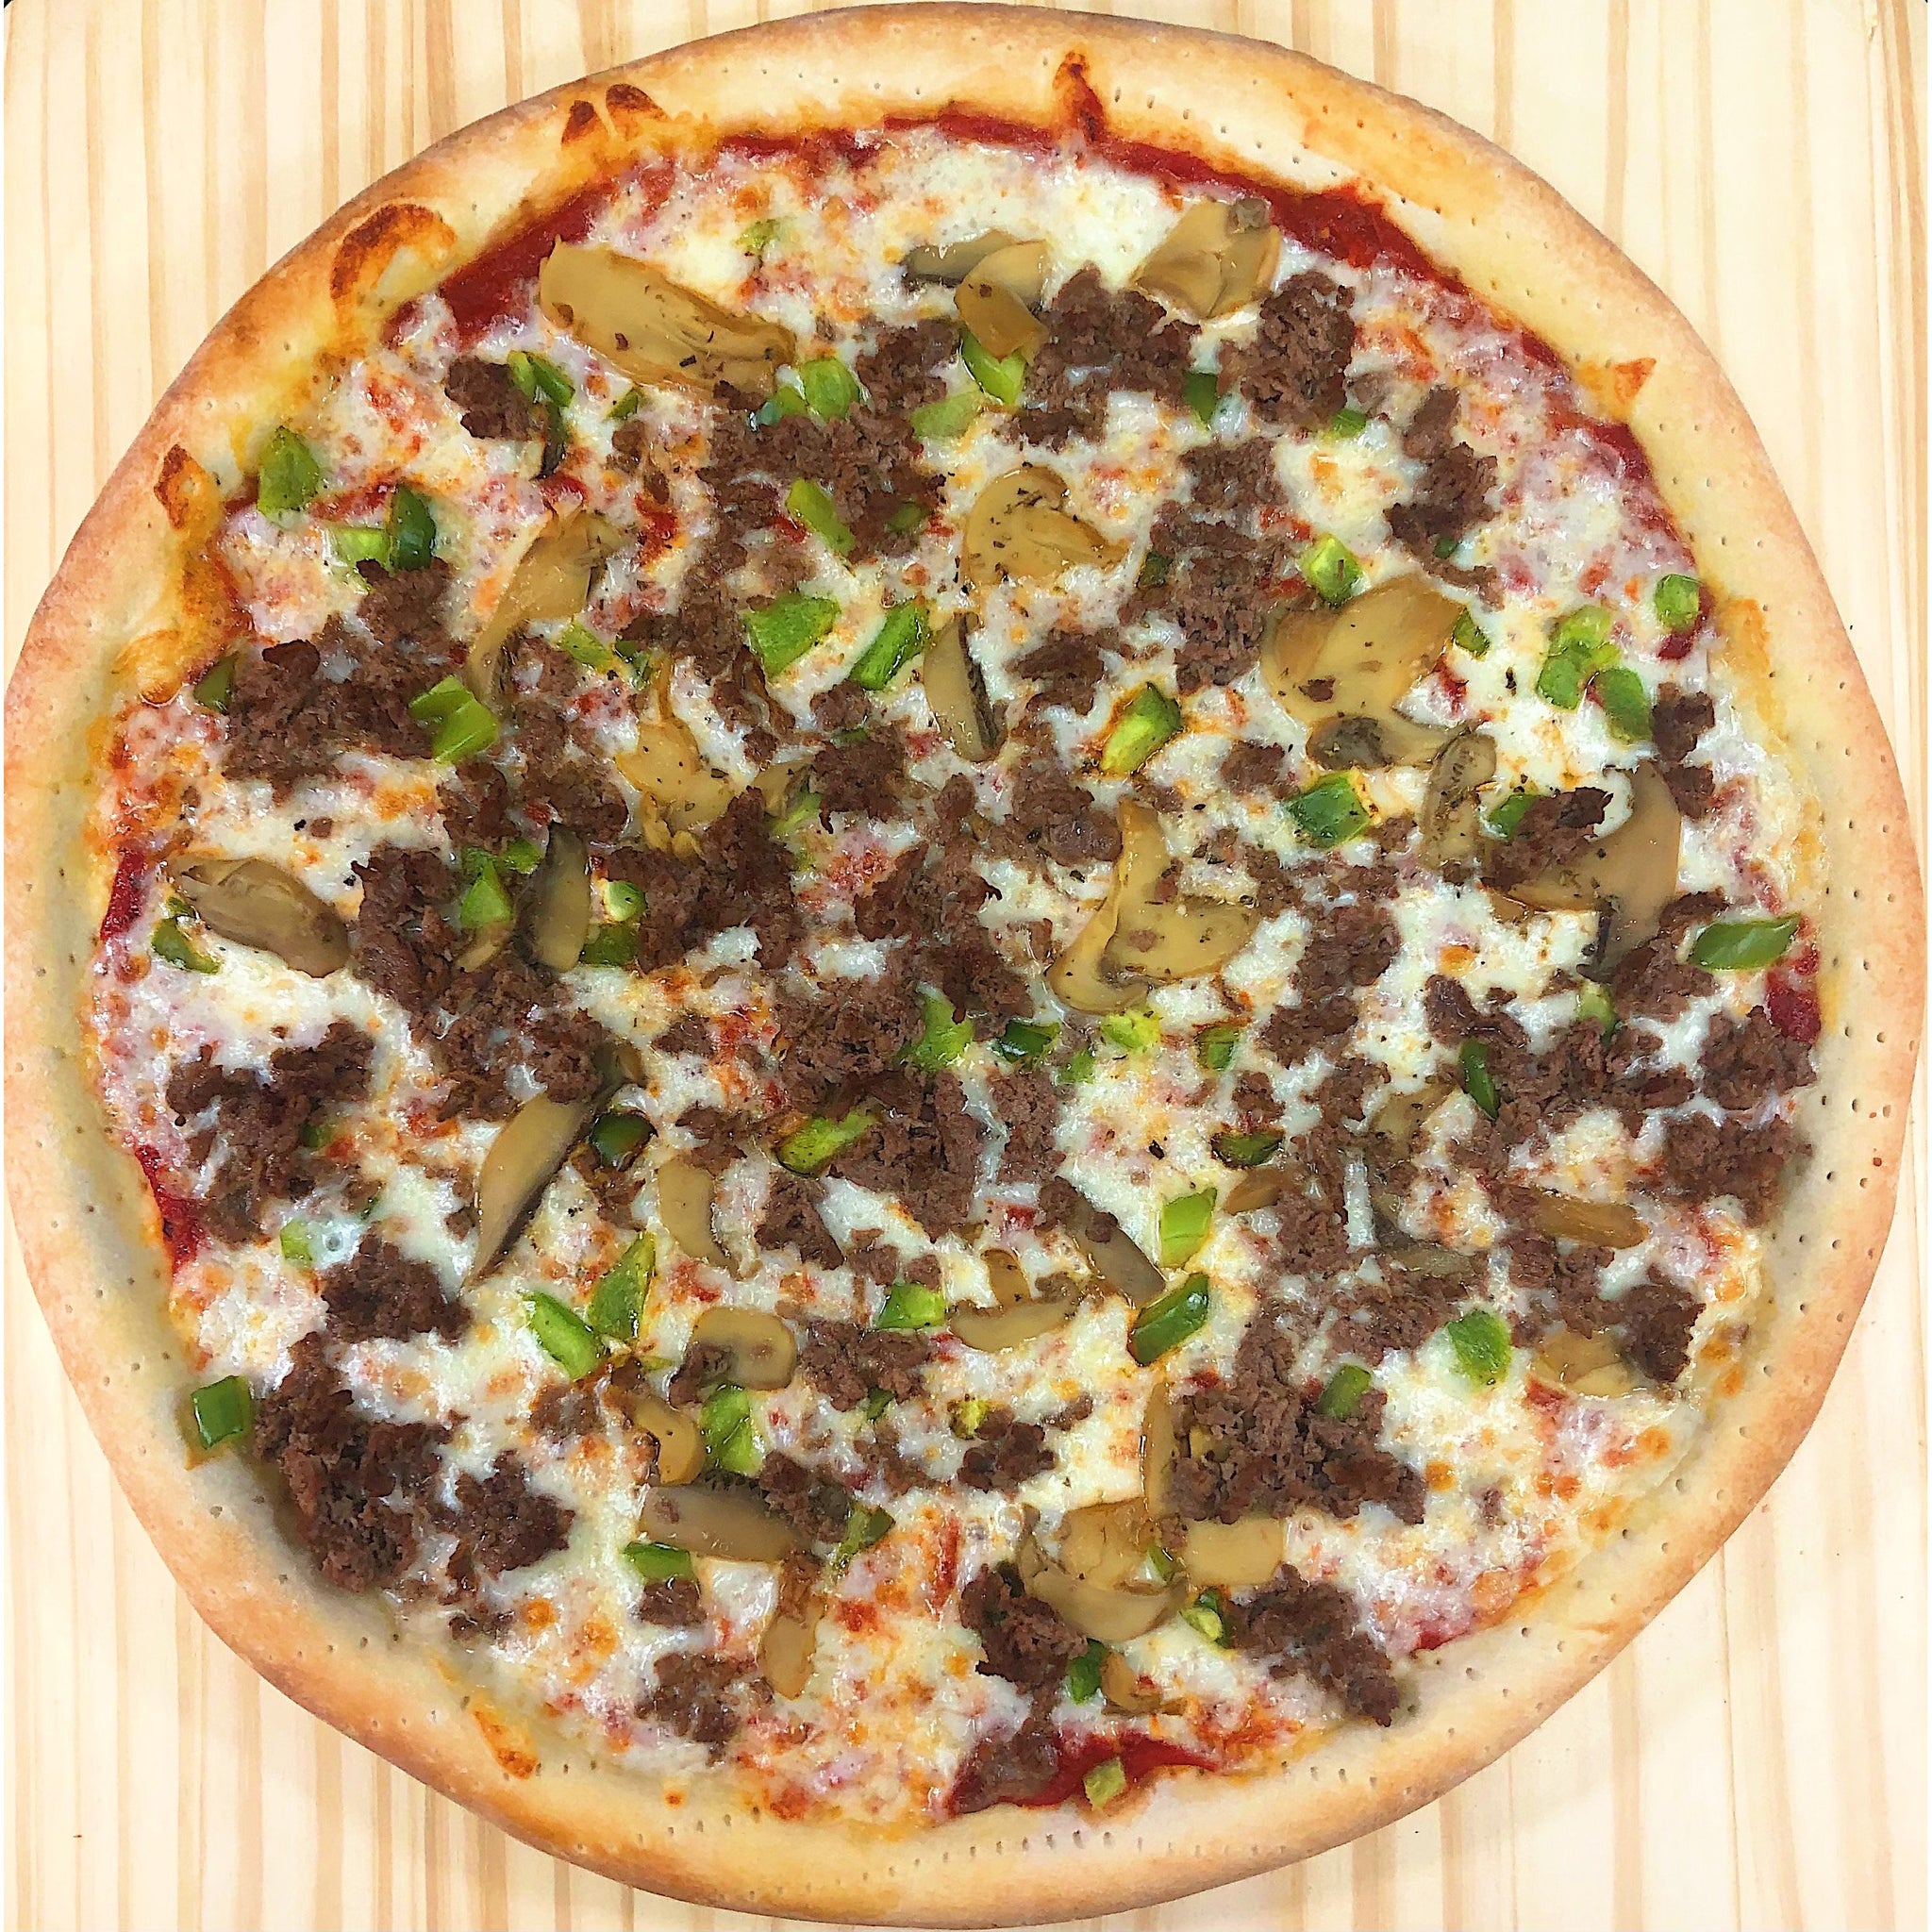  An image of a cheesesteak pizza. The pizza has a thin, crispy crust and is topped with slices of tender beefsteak, sautéed onions, bell peppers, and melted cheese. The combination of flavors mimics the iconic cheesesteak sandwich. The pizza is baked to perfection, with the cheese melted and slightly golden. It showcases a delicious fusion of two beloved dishes, the cheesesteak and pizza.